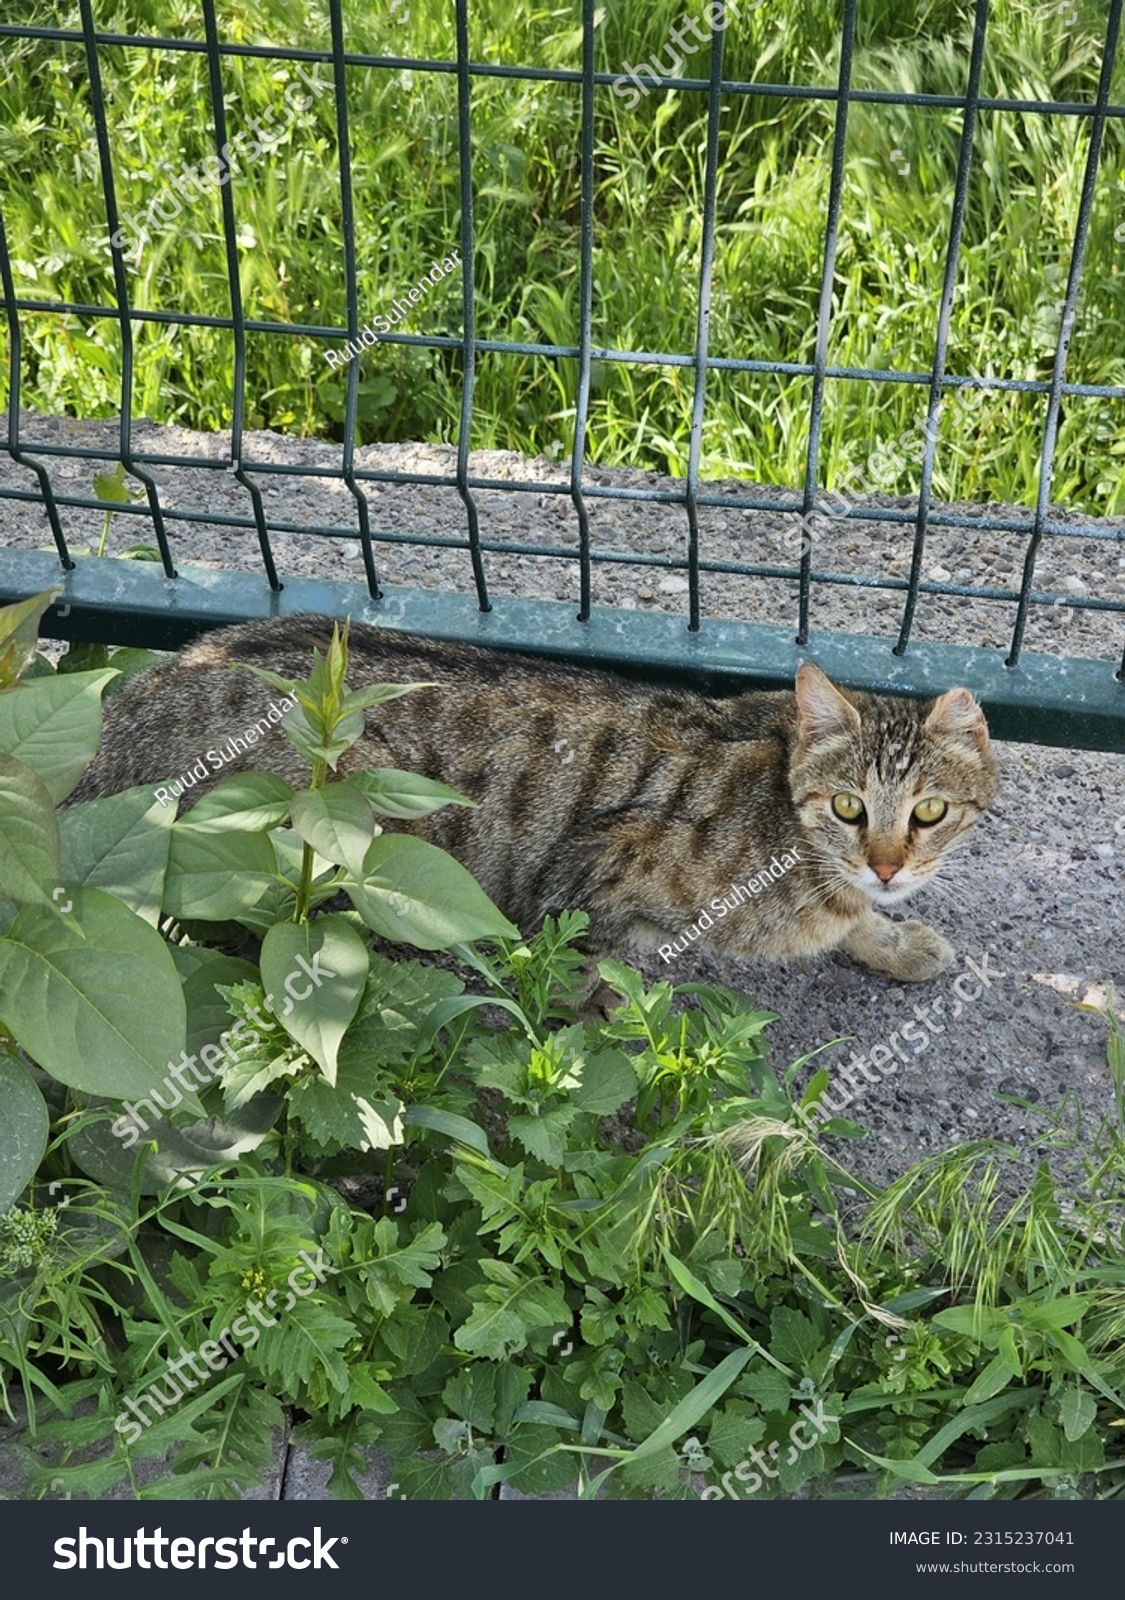 A grayish cat was near the fence of a yard, which was surrounded by weeds #2315237041